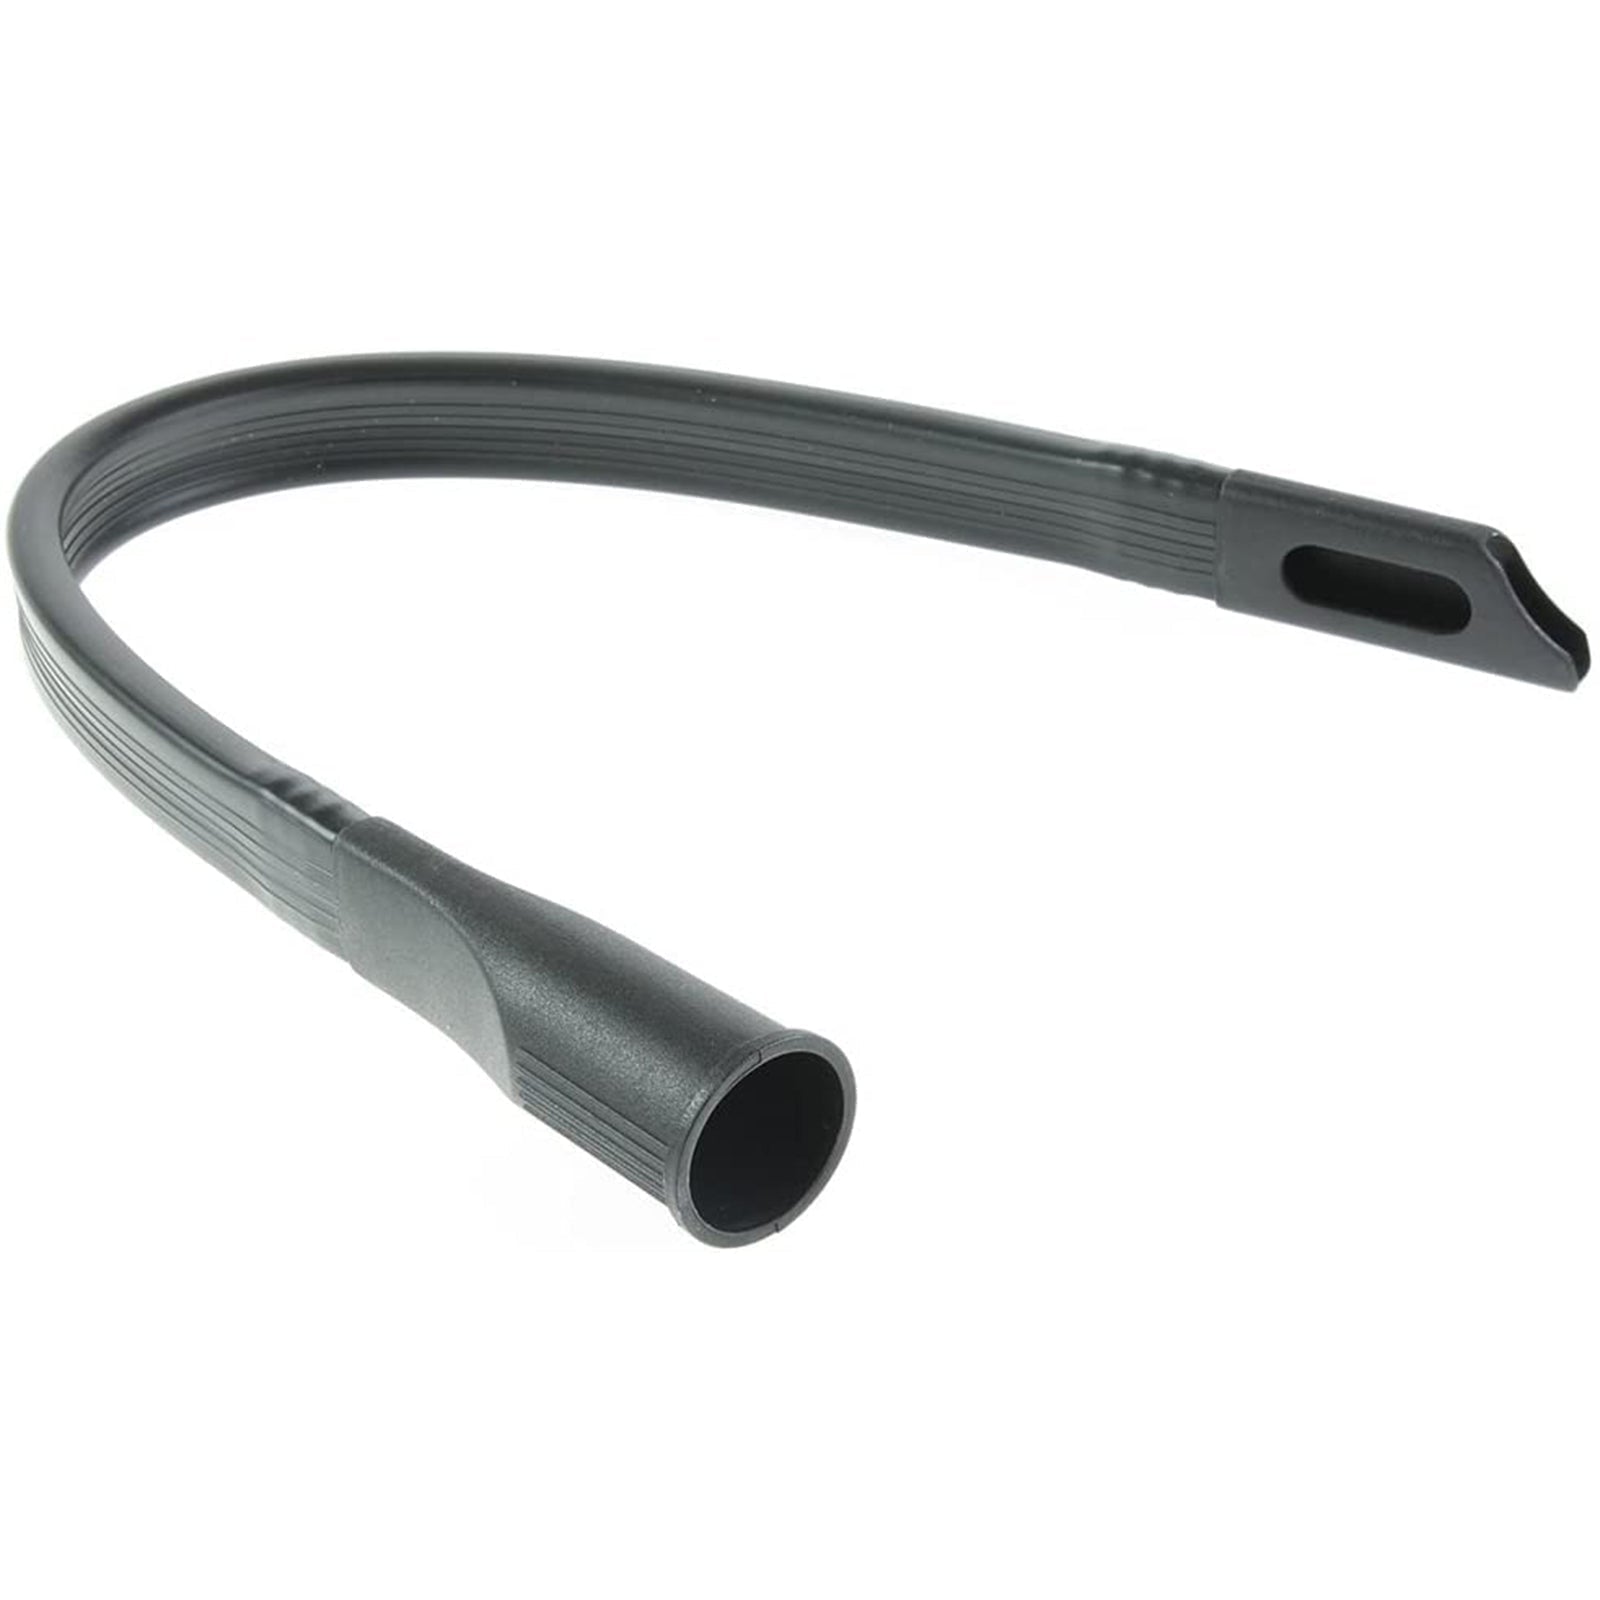 Flexible Crevice Tool Extra Long compatible with NILCO Vacuum Cleaner (32mm or 35mm)